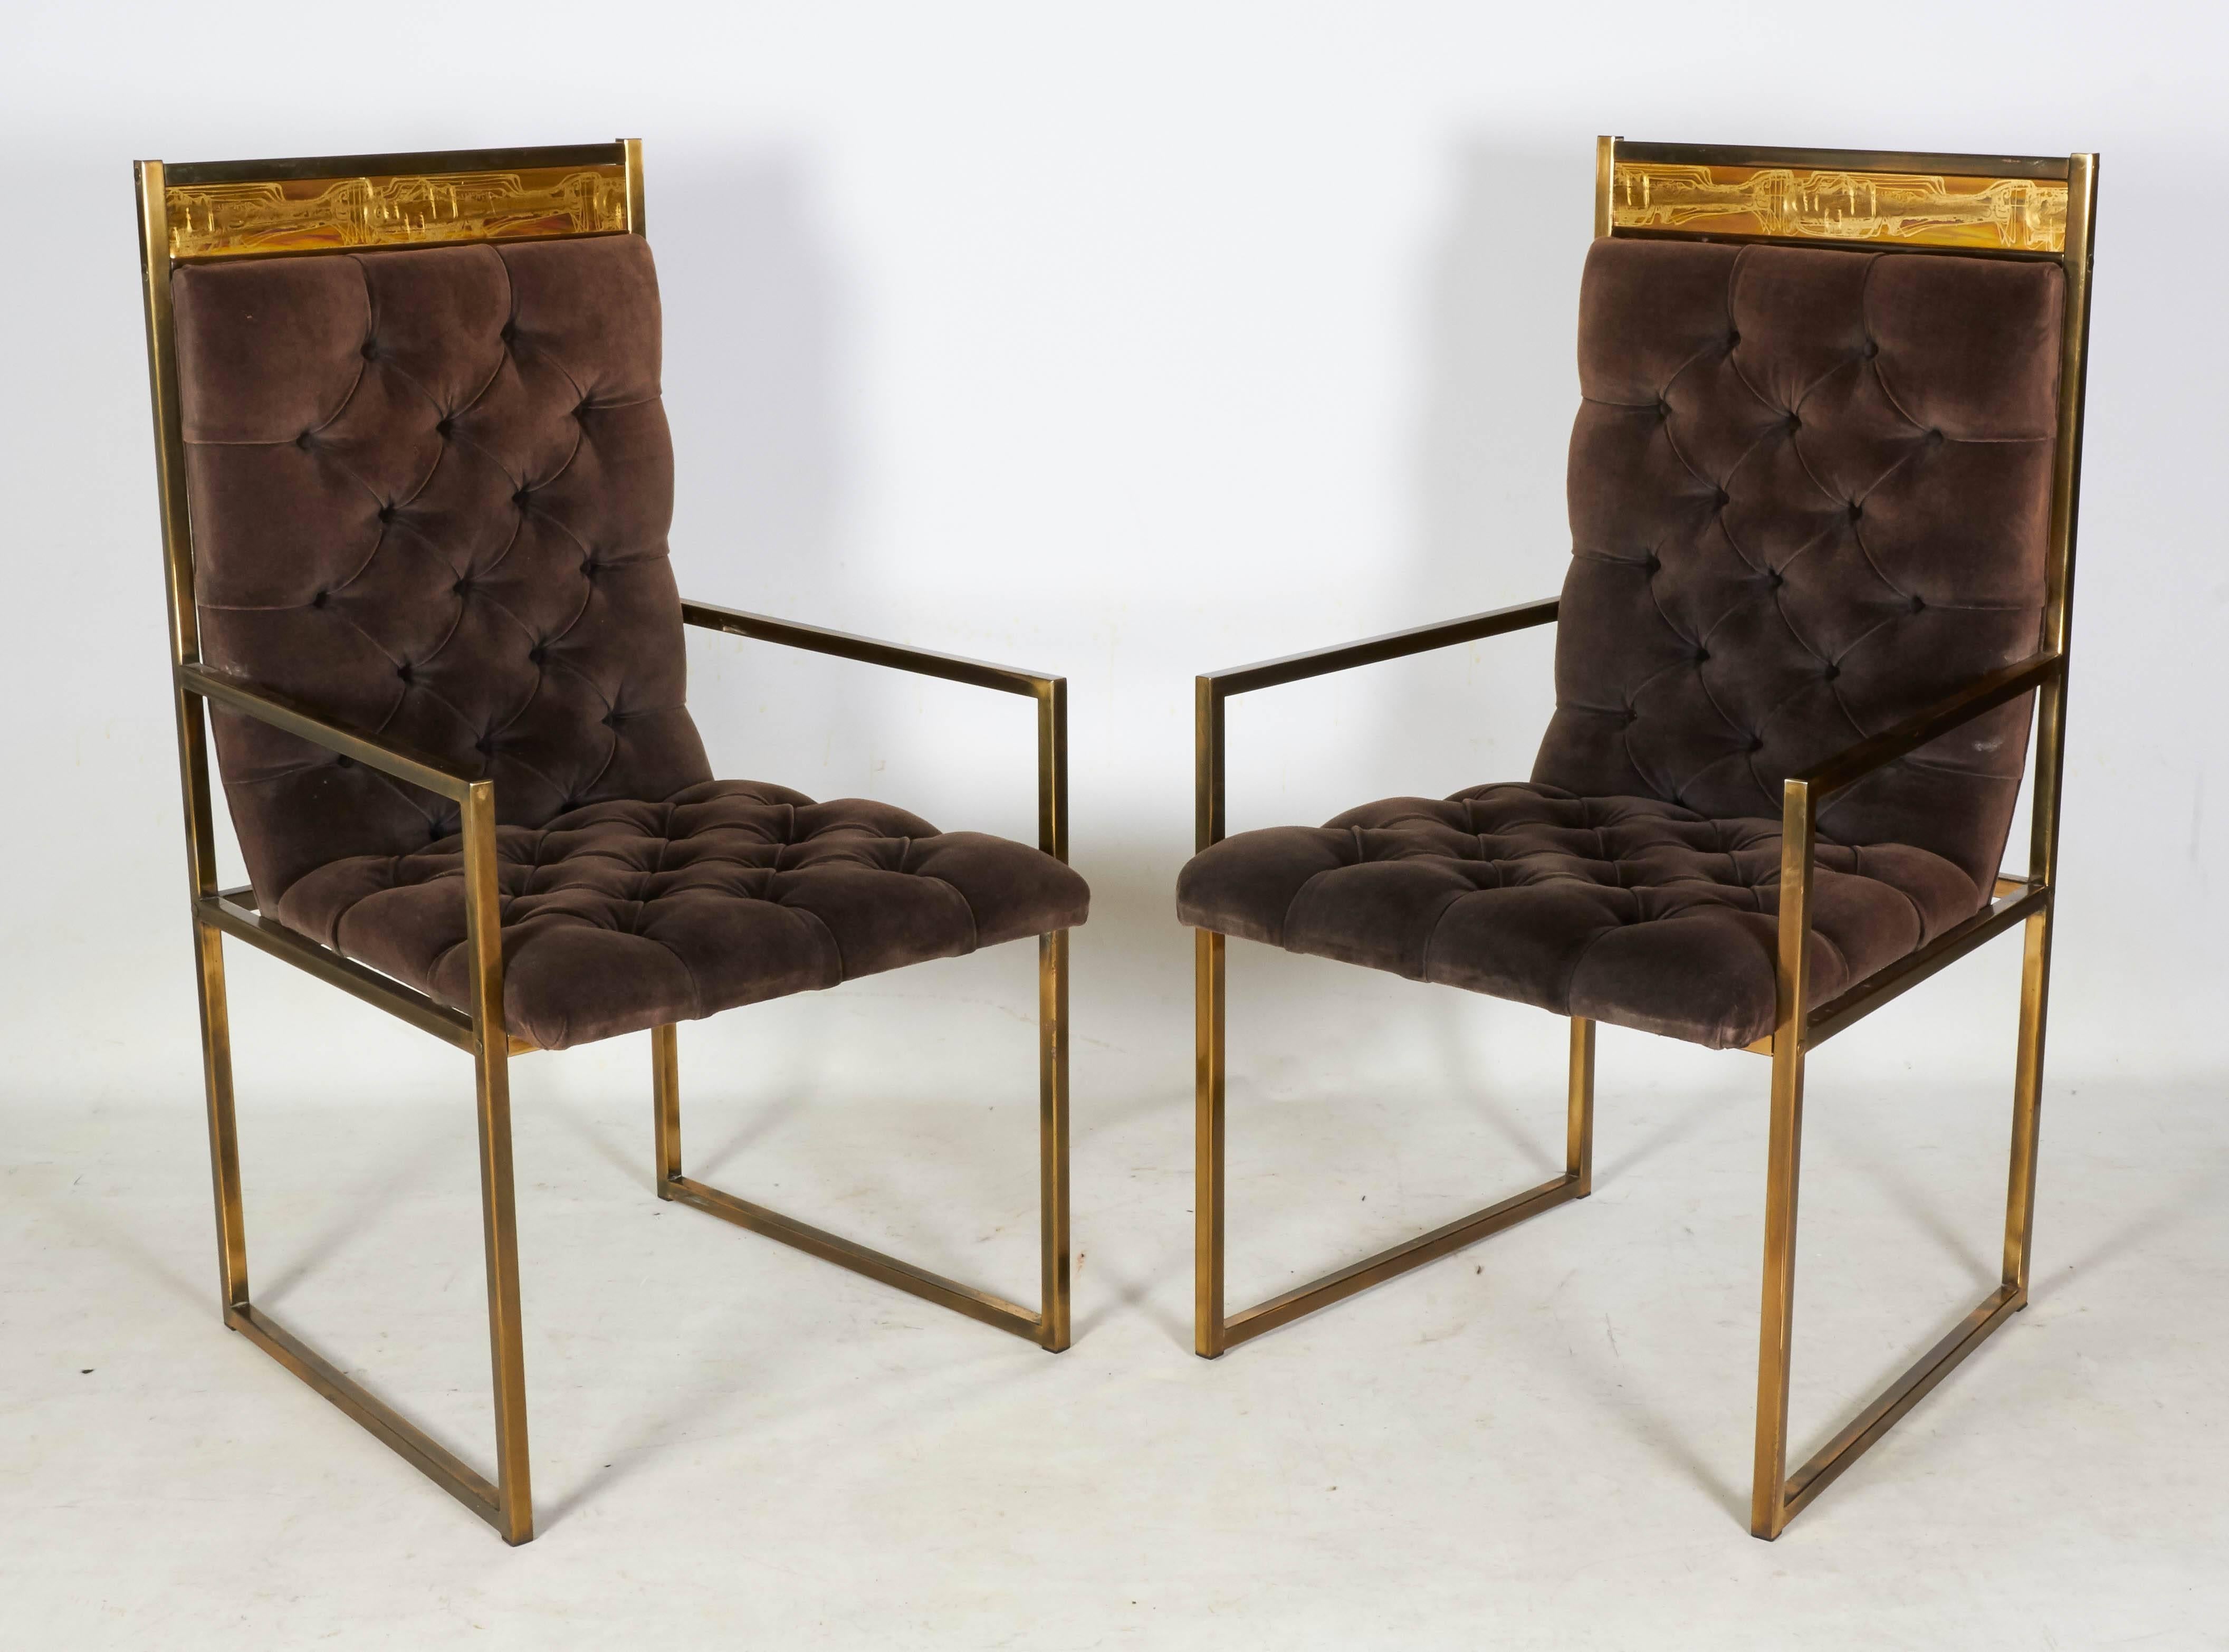 Extraordinary and very rare set of six decorative modern dining chairs by Bernhard Rohne for Mastercraft. The chairs are in brass with brown tufted velvet upholstery. Each chair is accented with a panel of Rohne's acid etched art. Matching brass